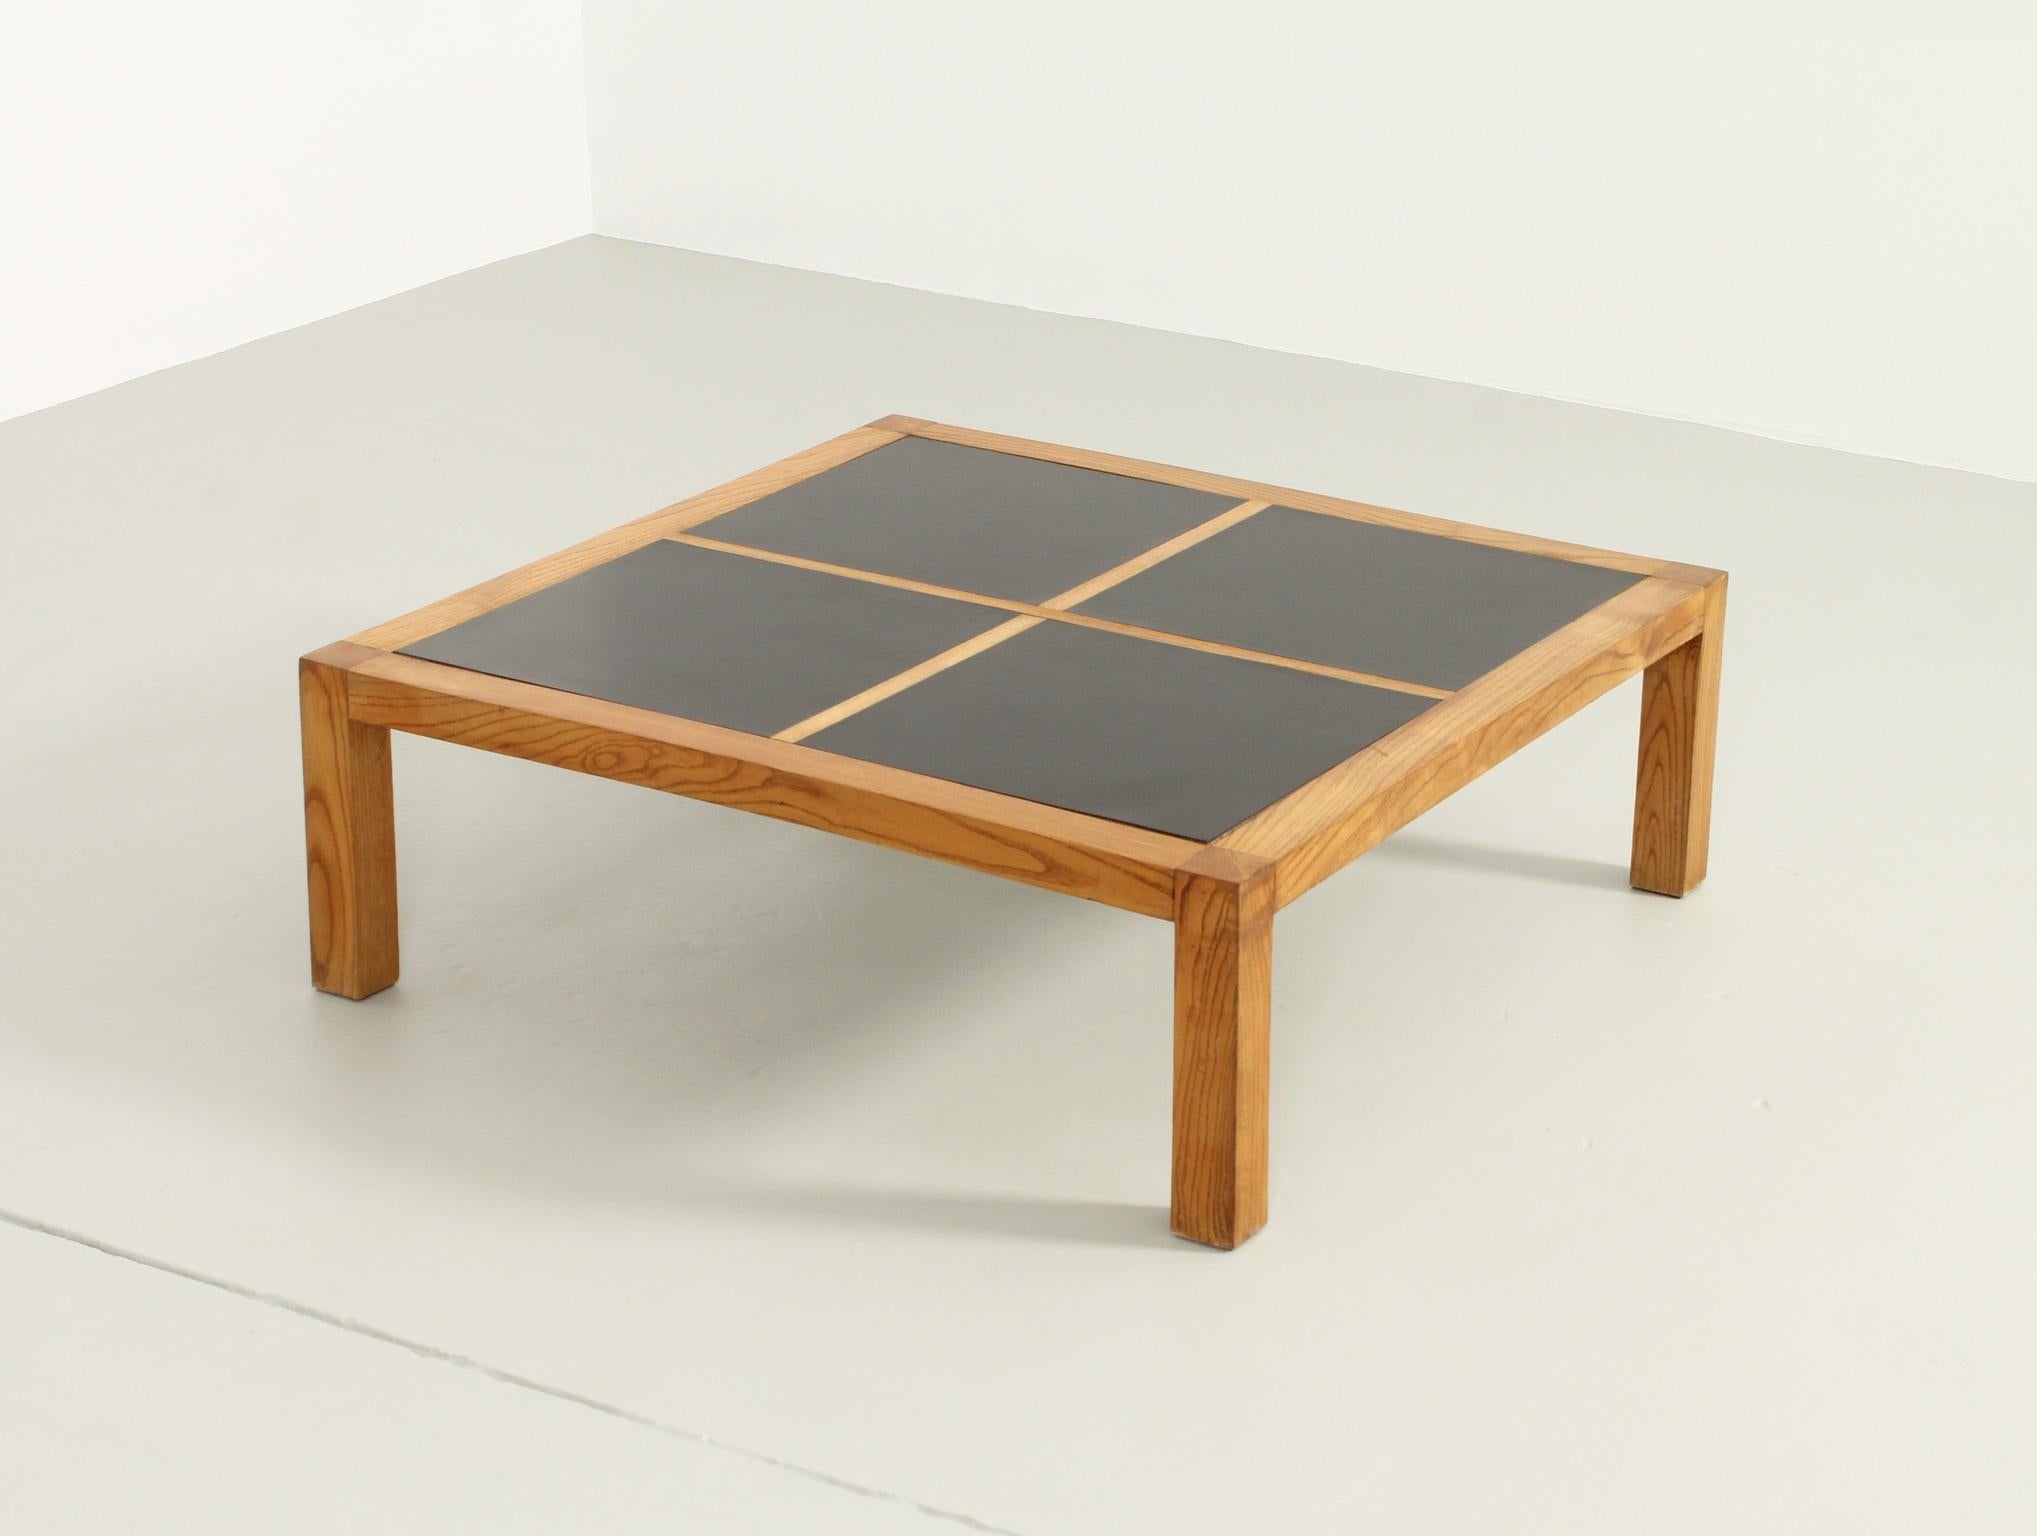 Late 20th Century Coffee or Center Table in Pine Wood and Laminate, France, 1970's For Sale